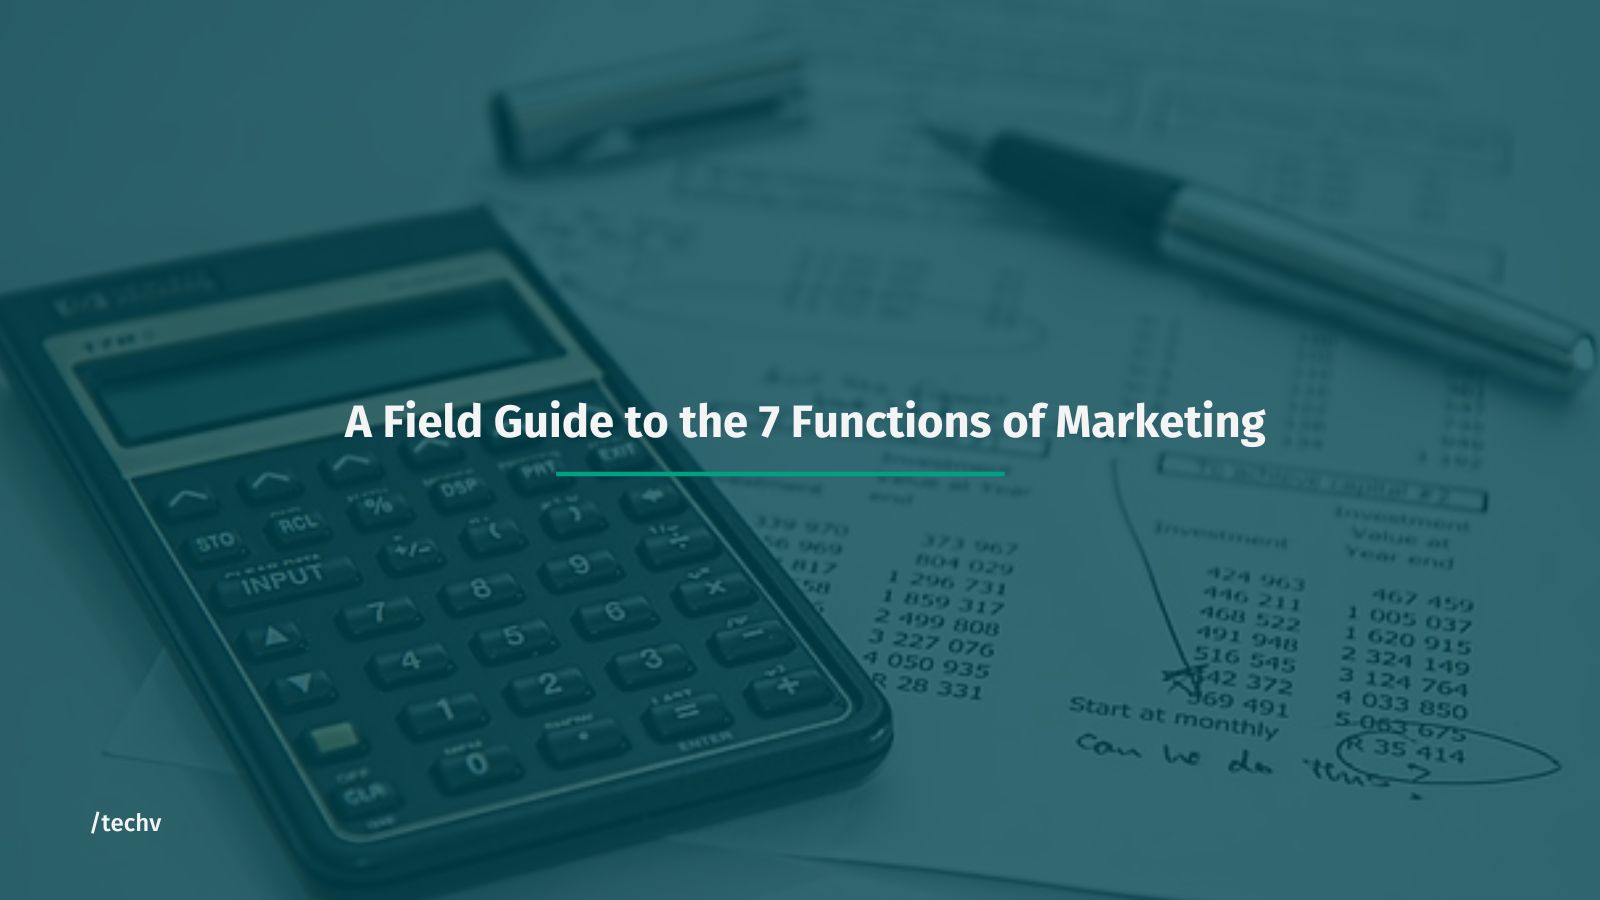 A Field Guide to the 7 Functions of Marketing